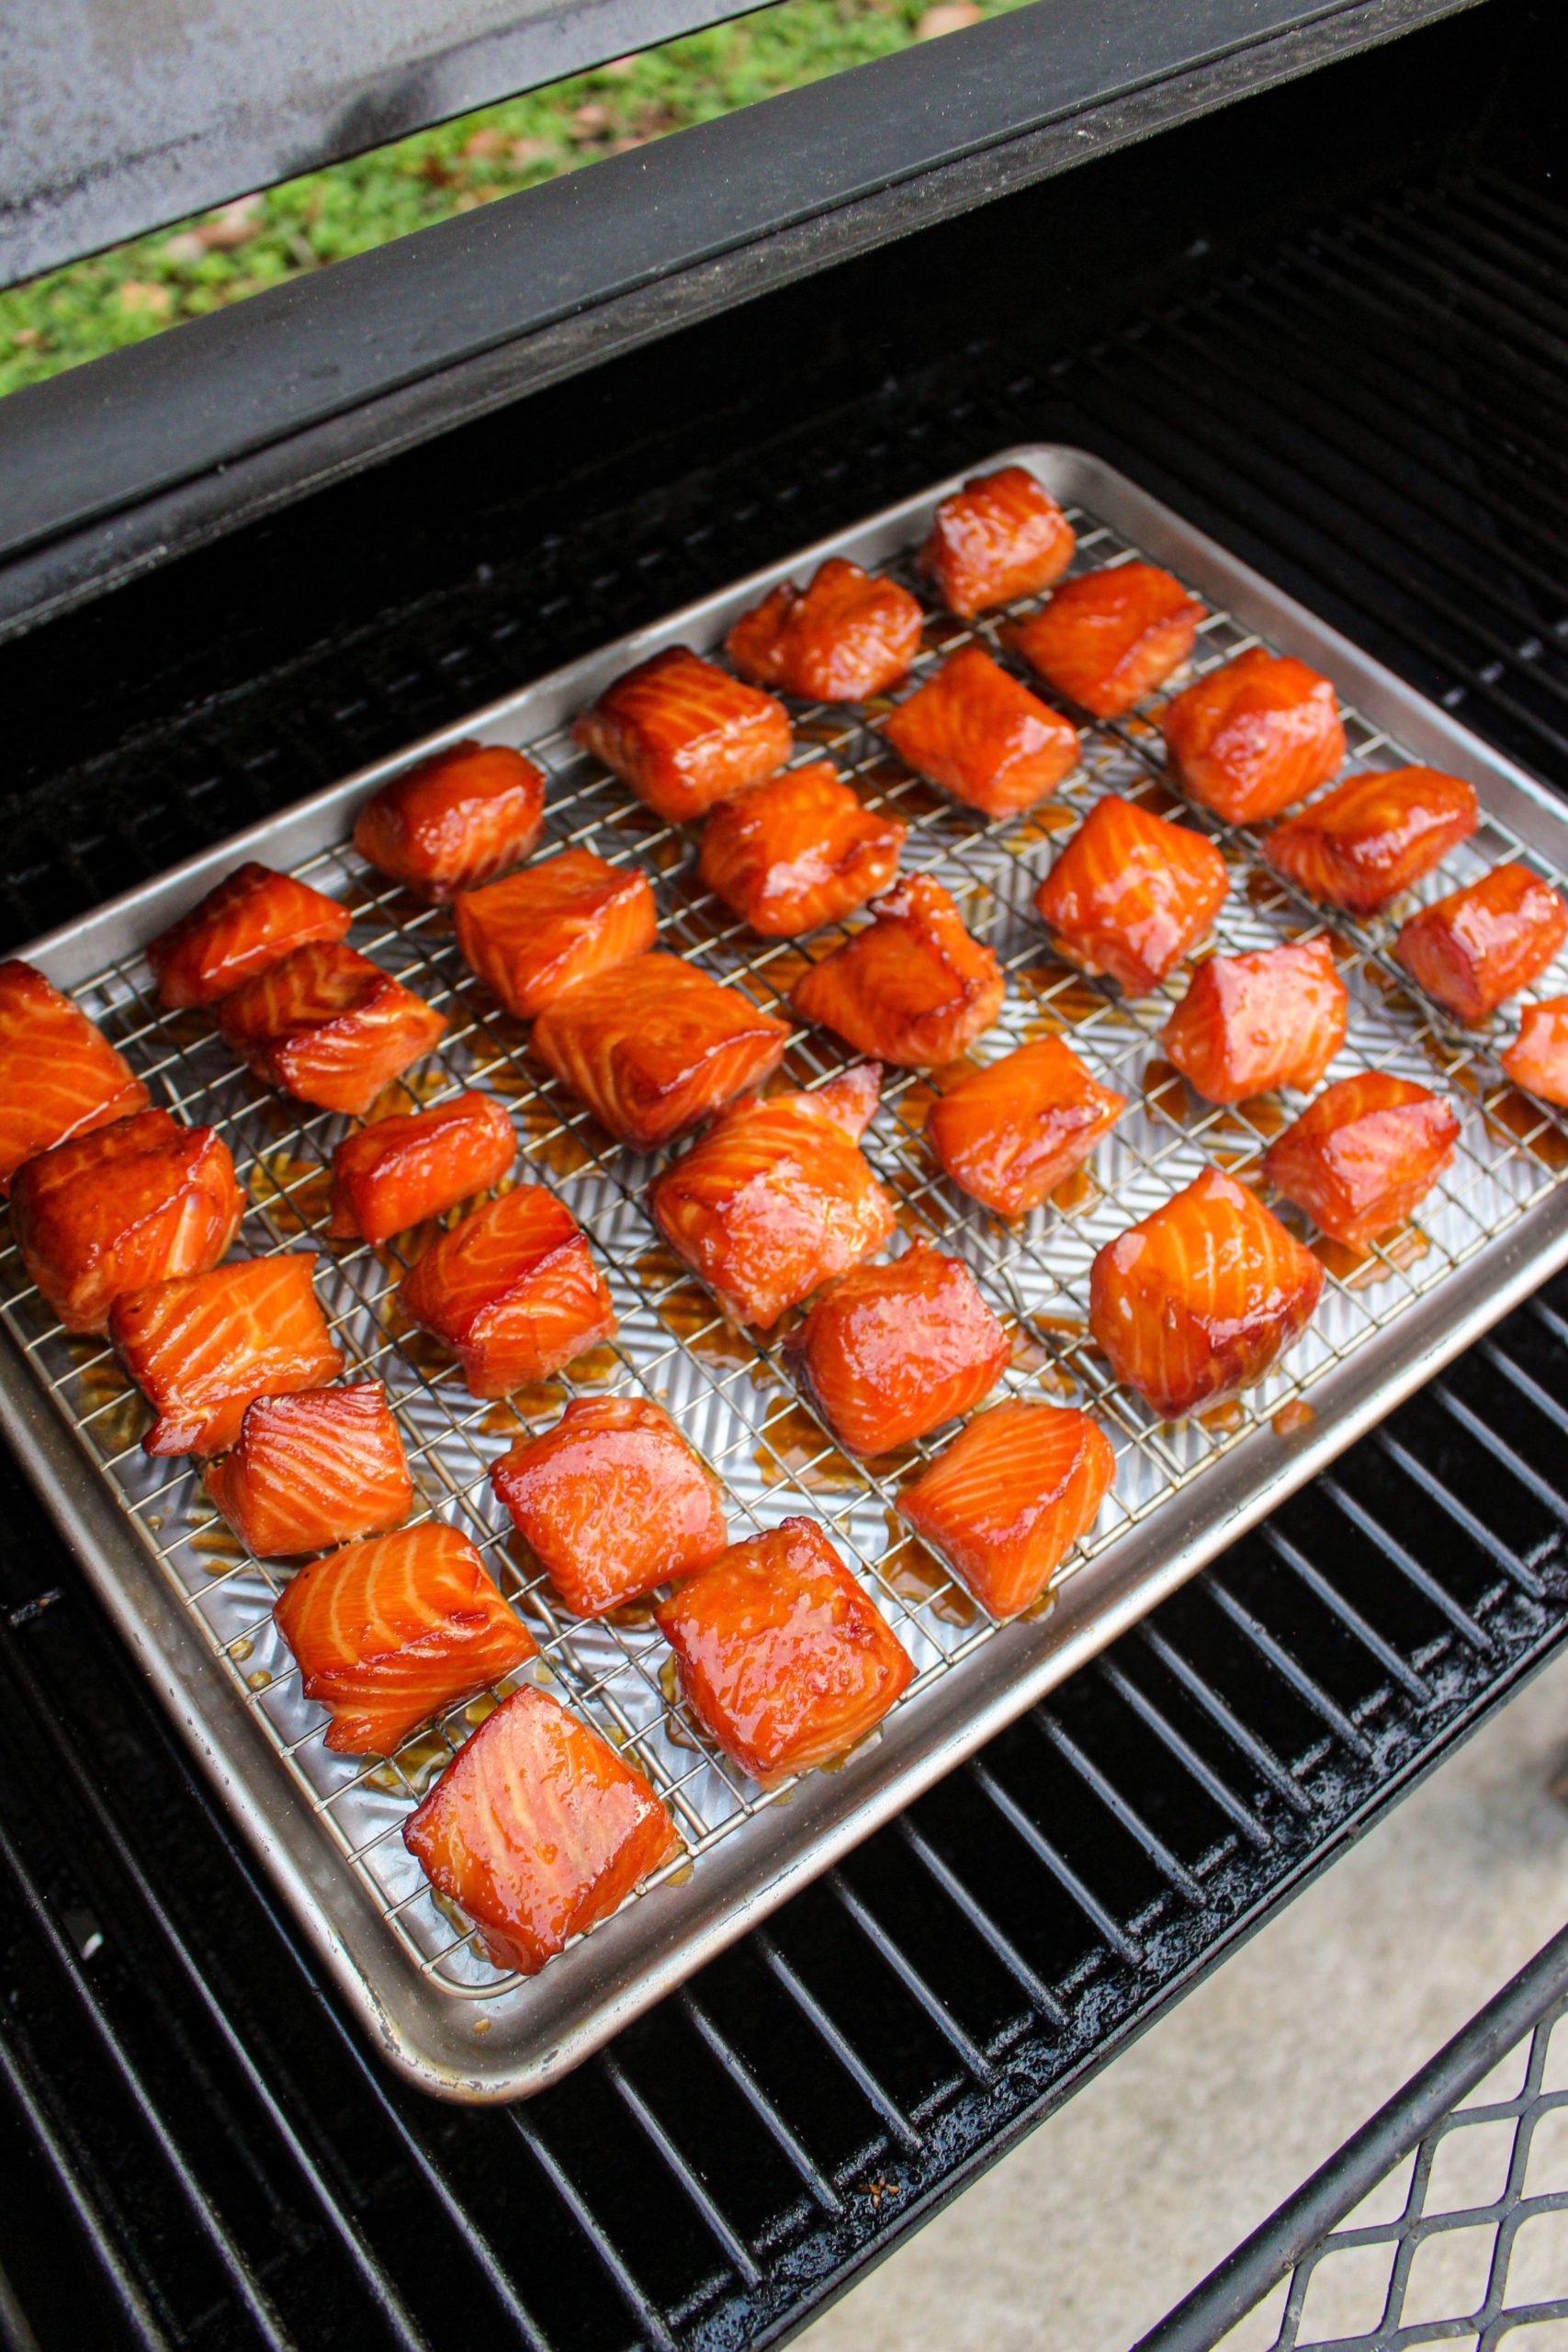 Smoked Salmon Burnt Ends get glazed.